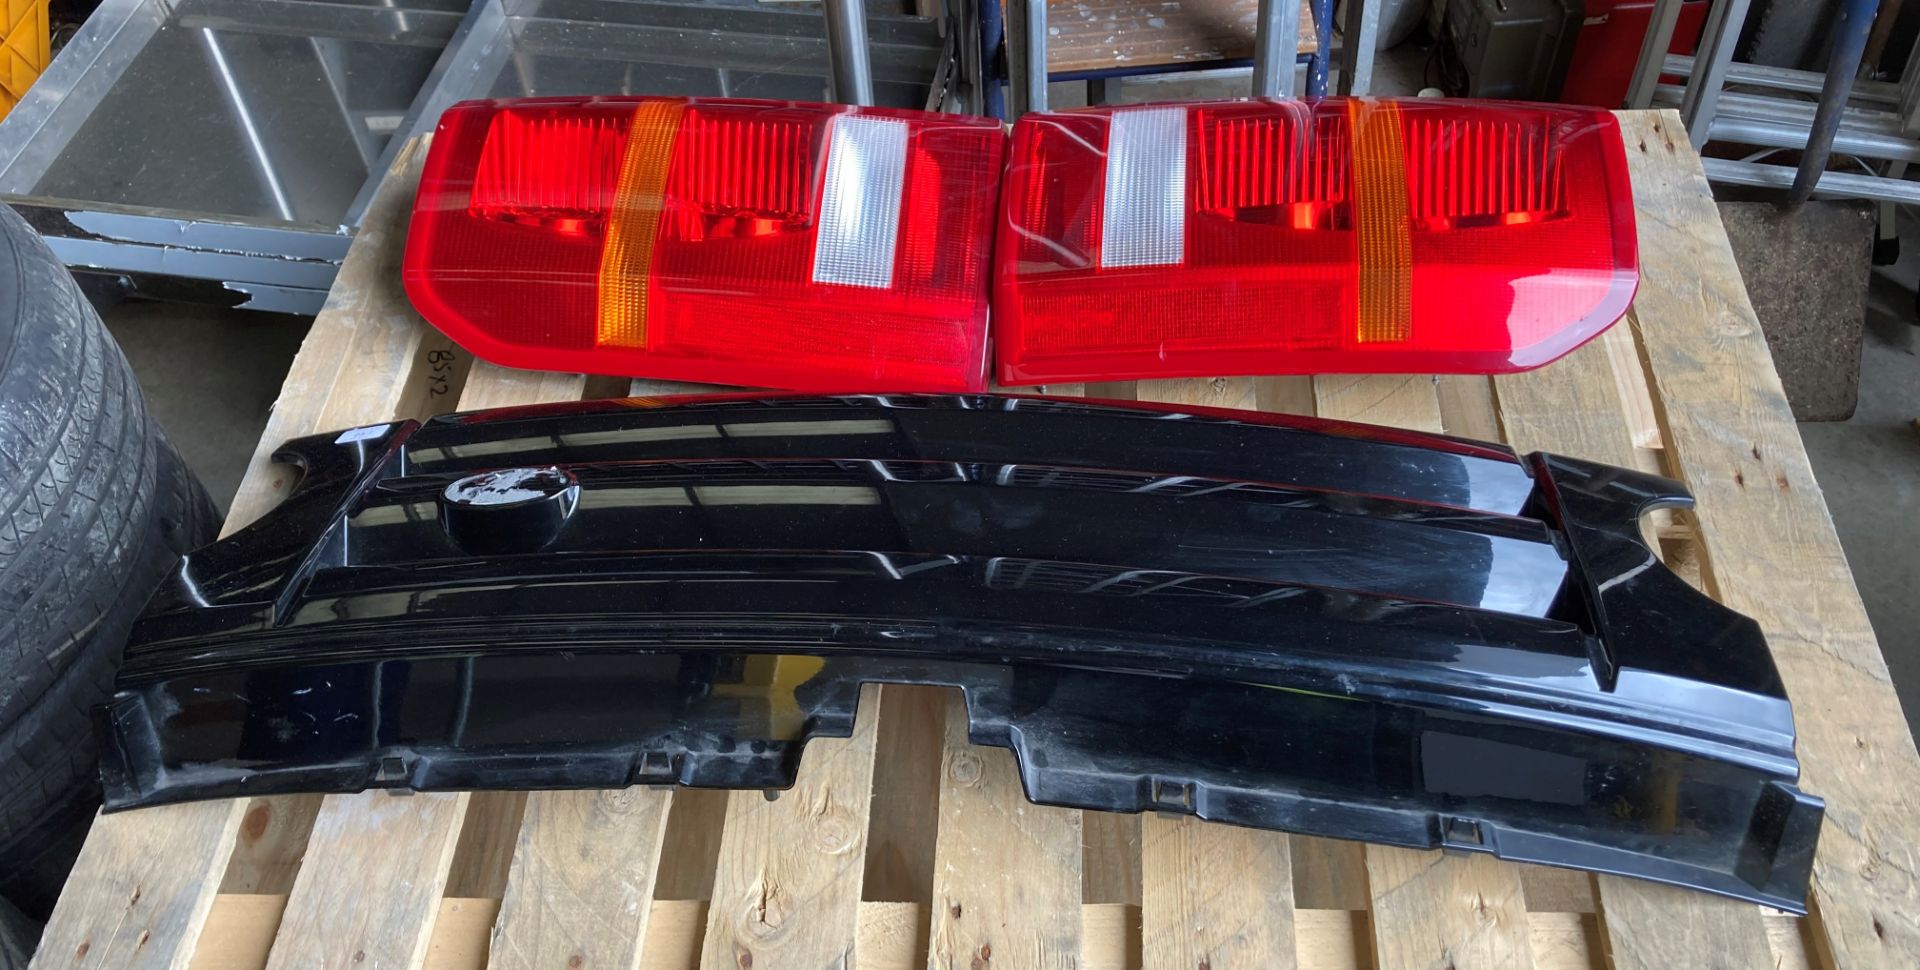 Landrover Discovery rear back lights and front grill